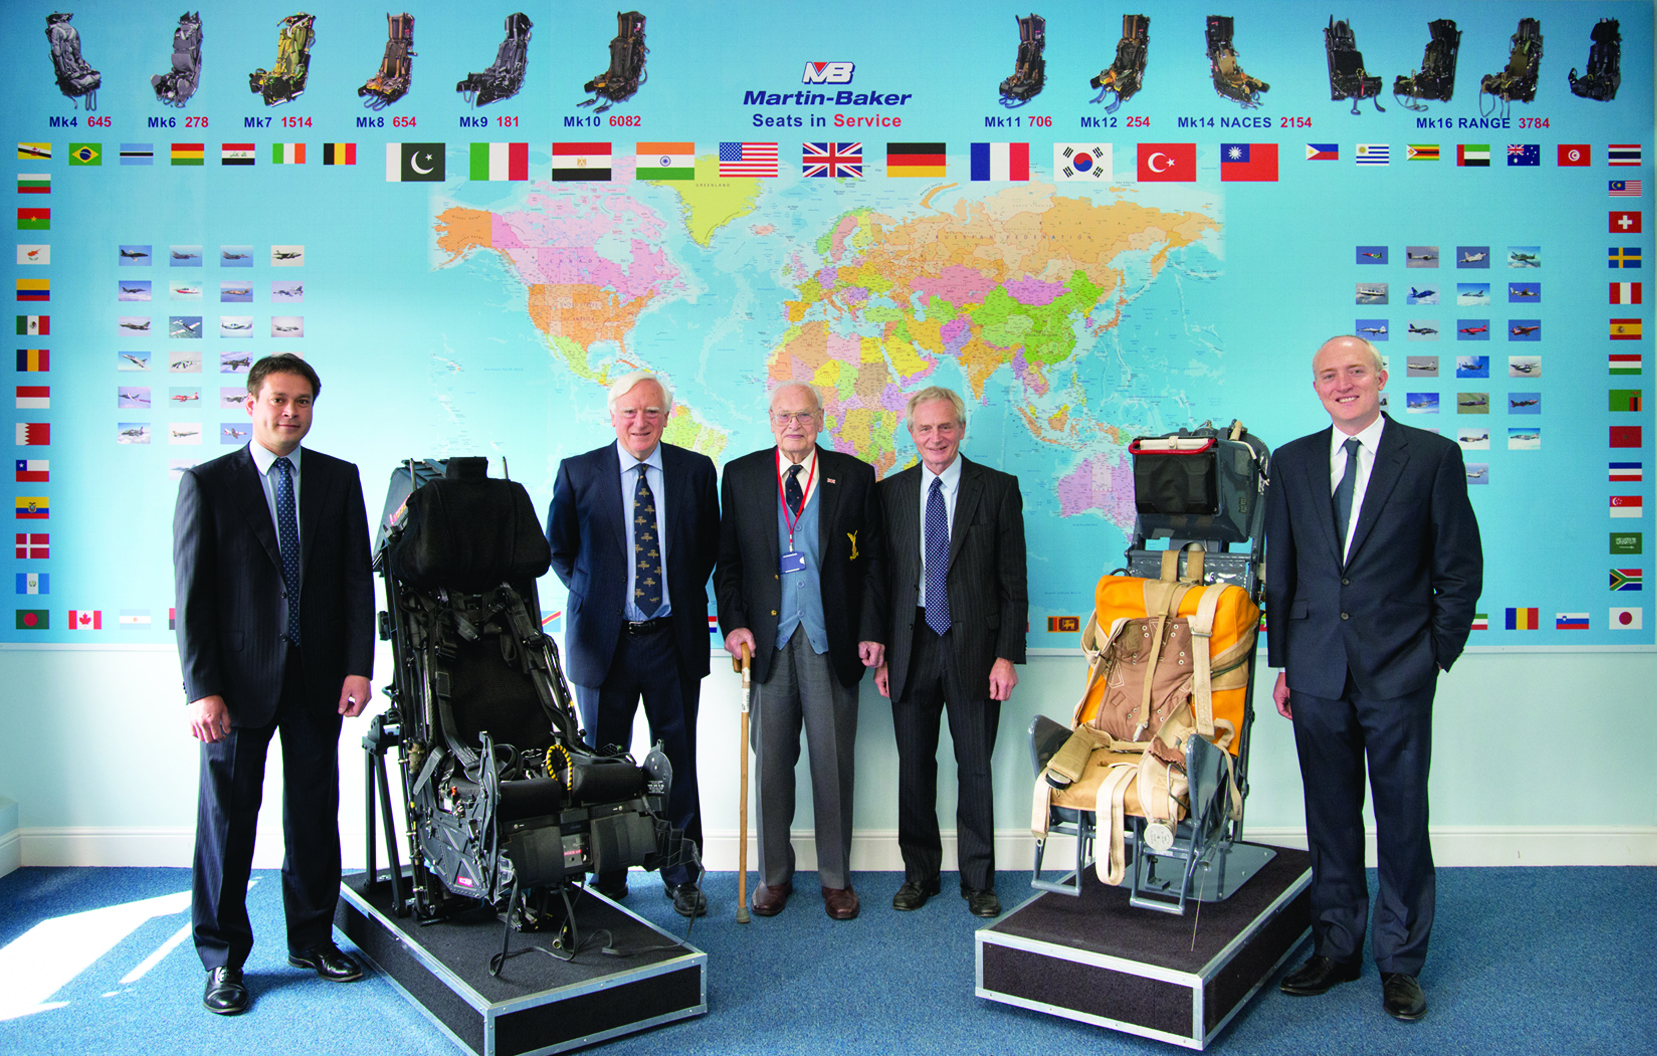 In 2013, Jo visited our Denham headquarters again and met with the Martin family. He was also reunited with his pre-Mk1 ejection seat that saved his life.